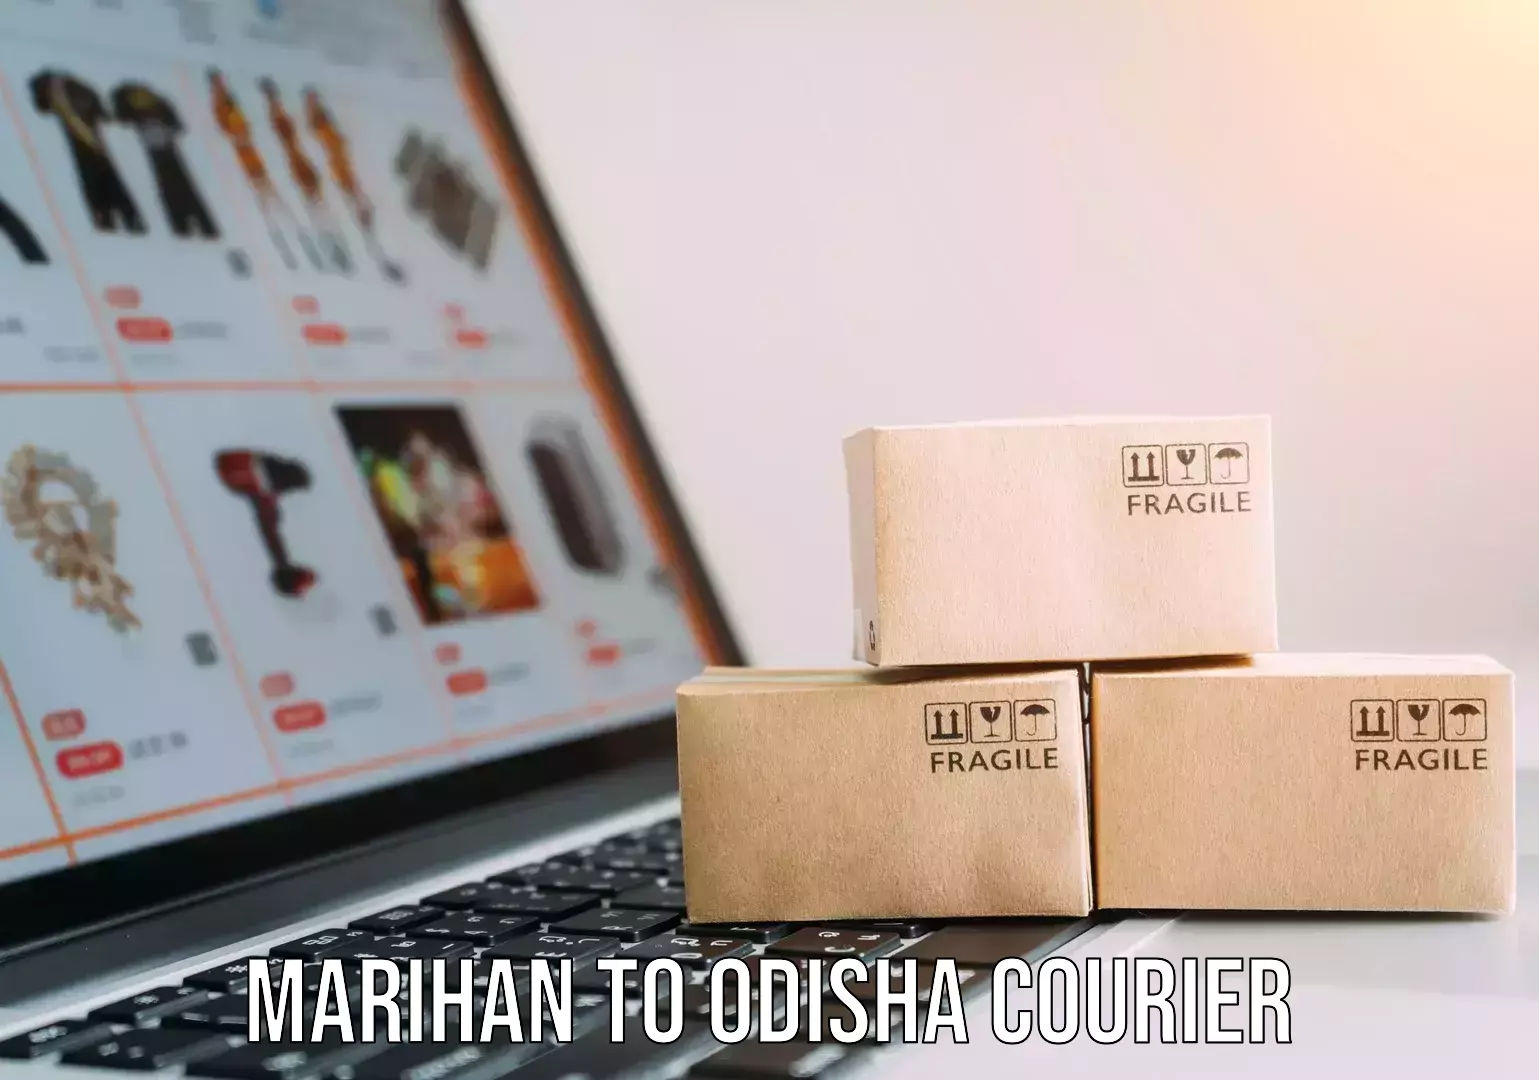 Professional movers and packers Marihan to Odisha